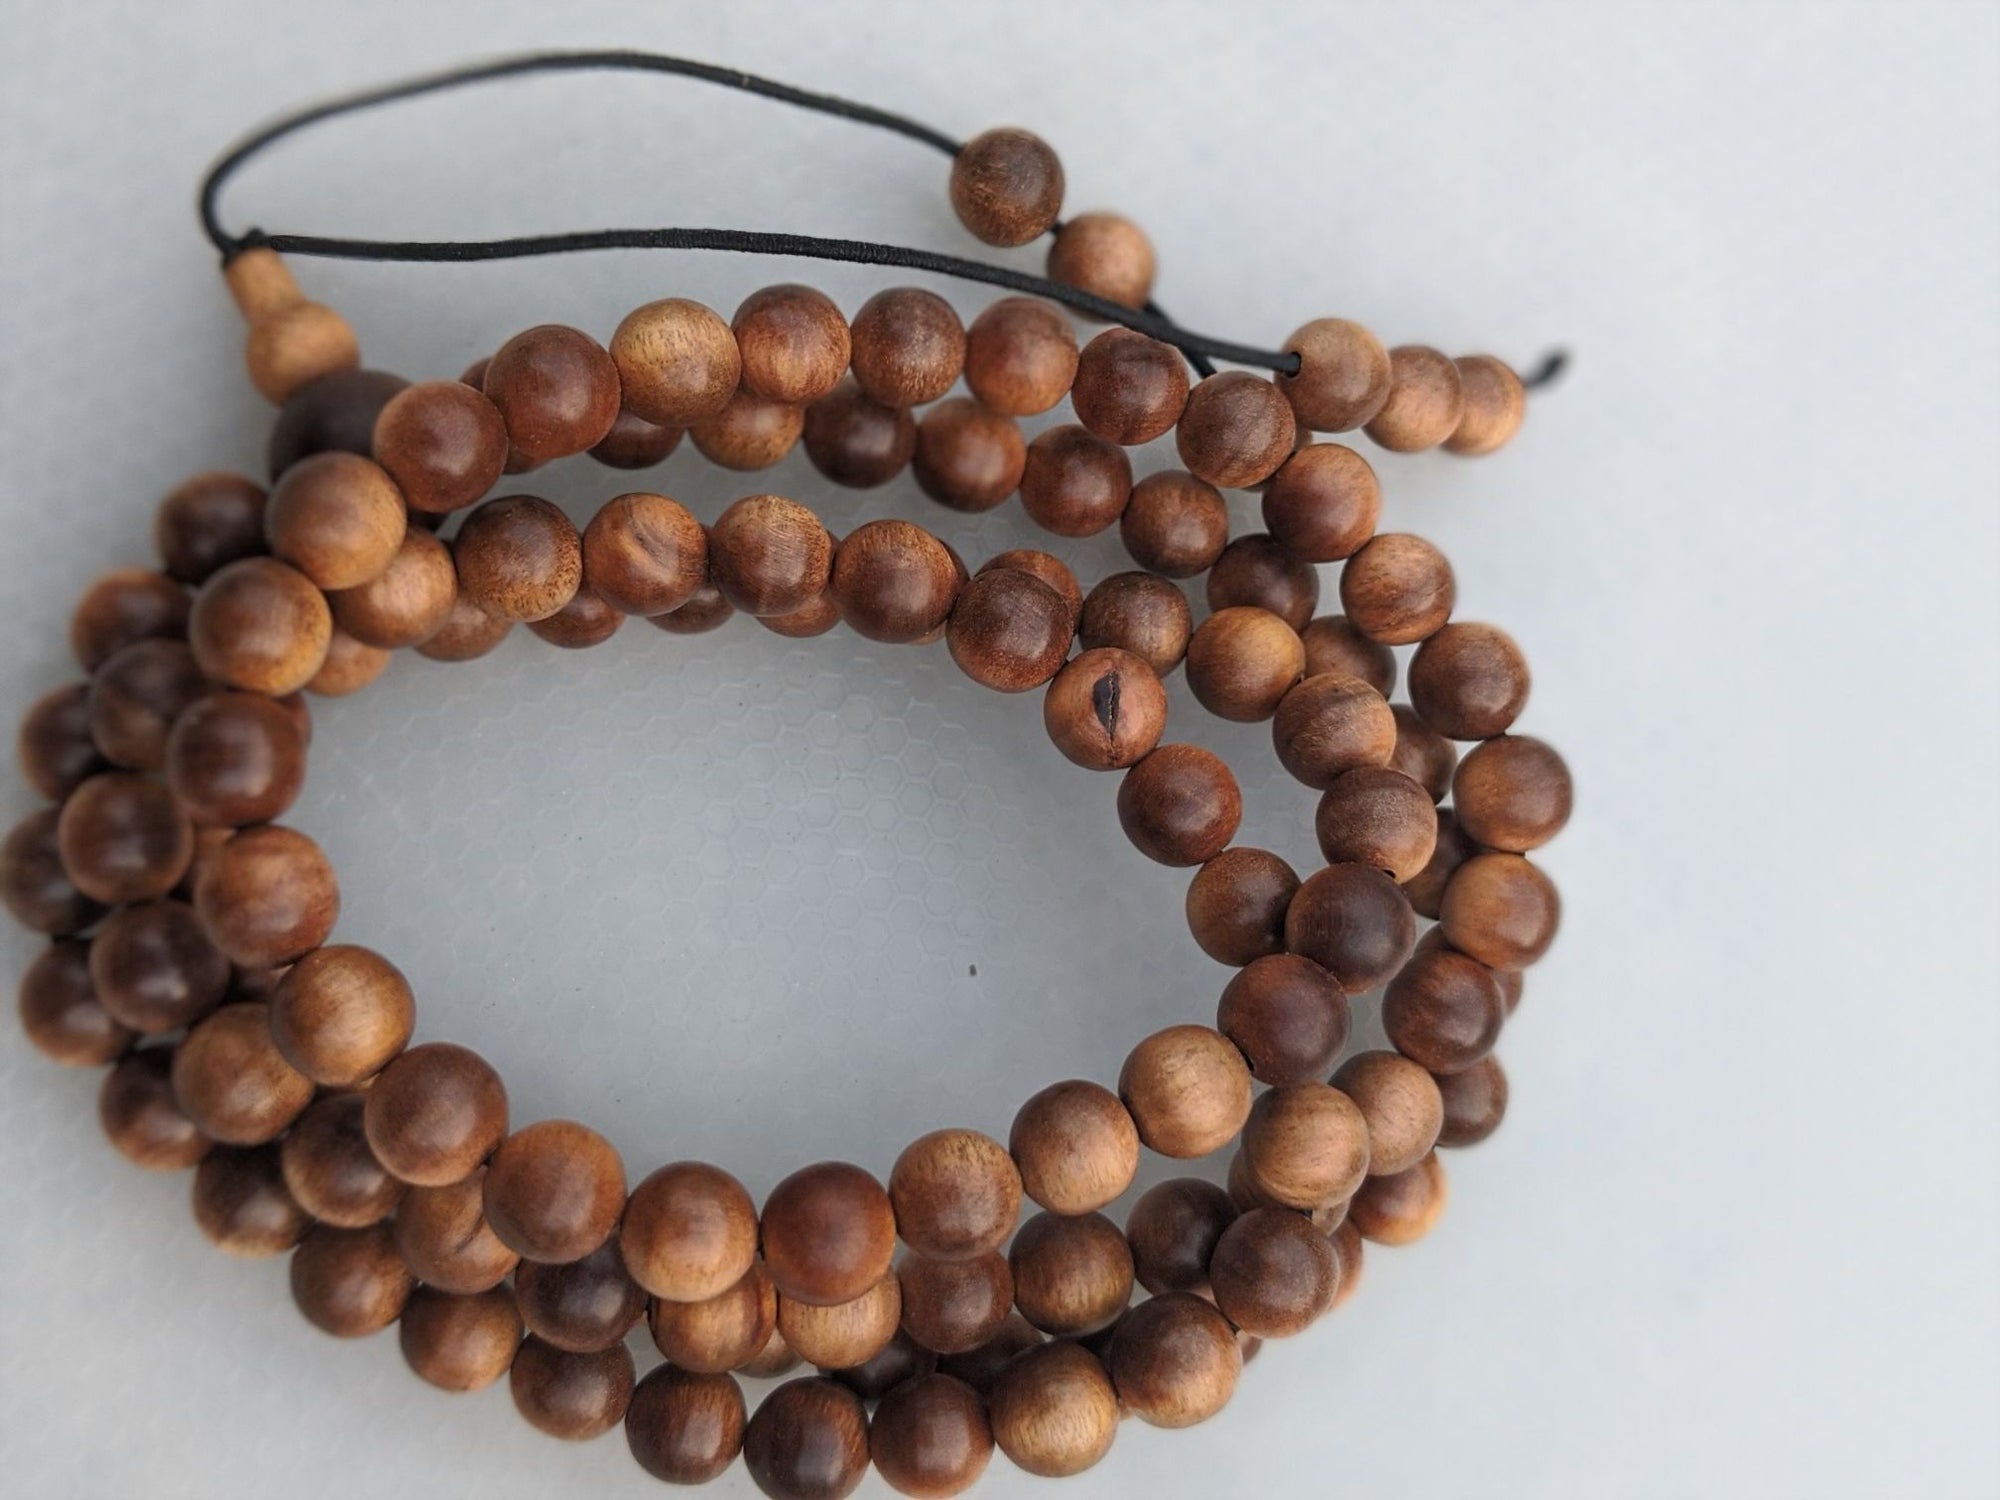 "The Beauty of the Death" Wild Aged Sandalwood beads -